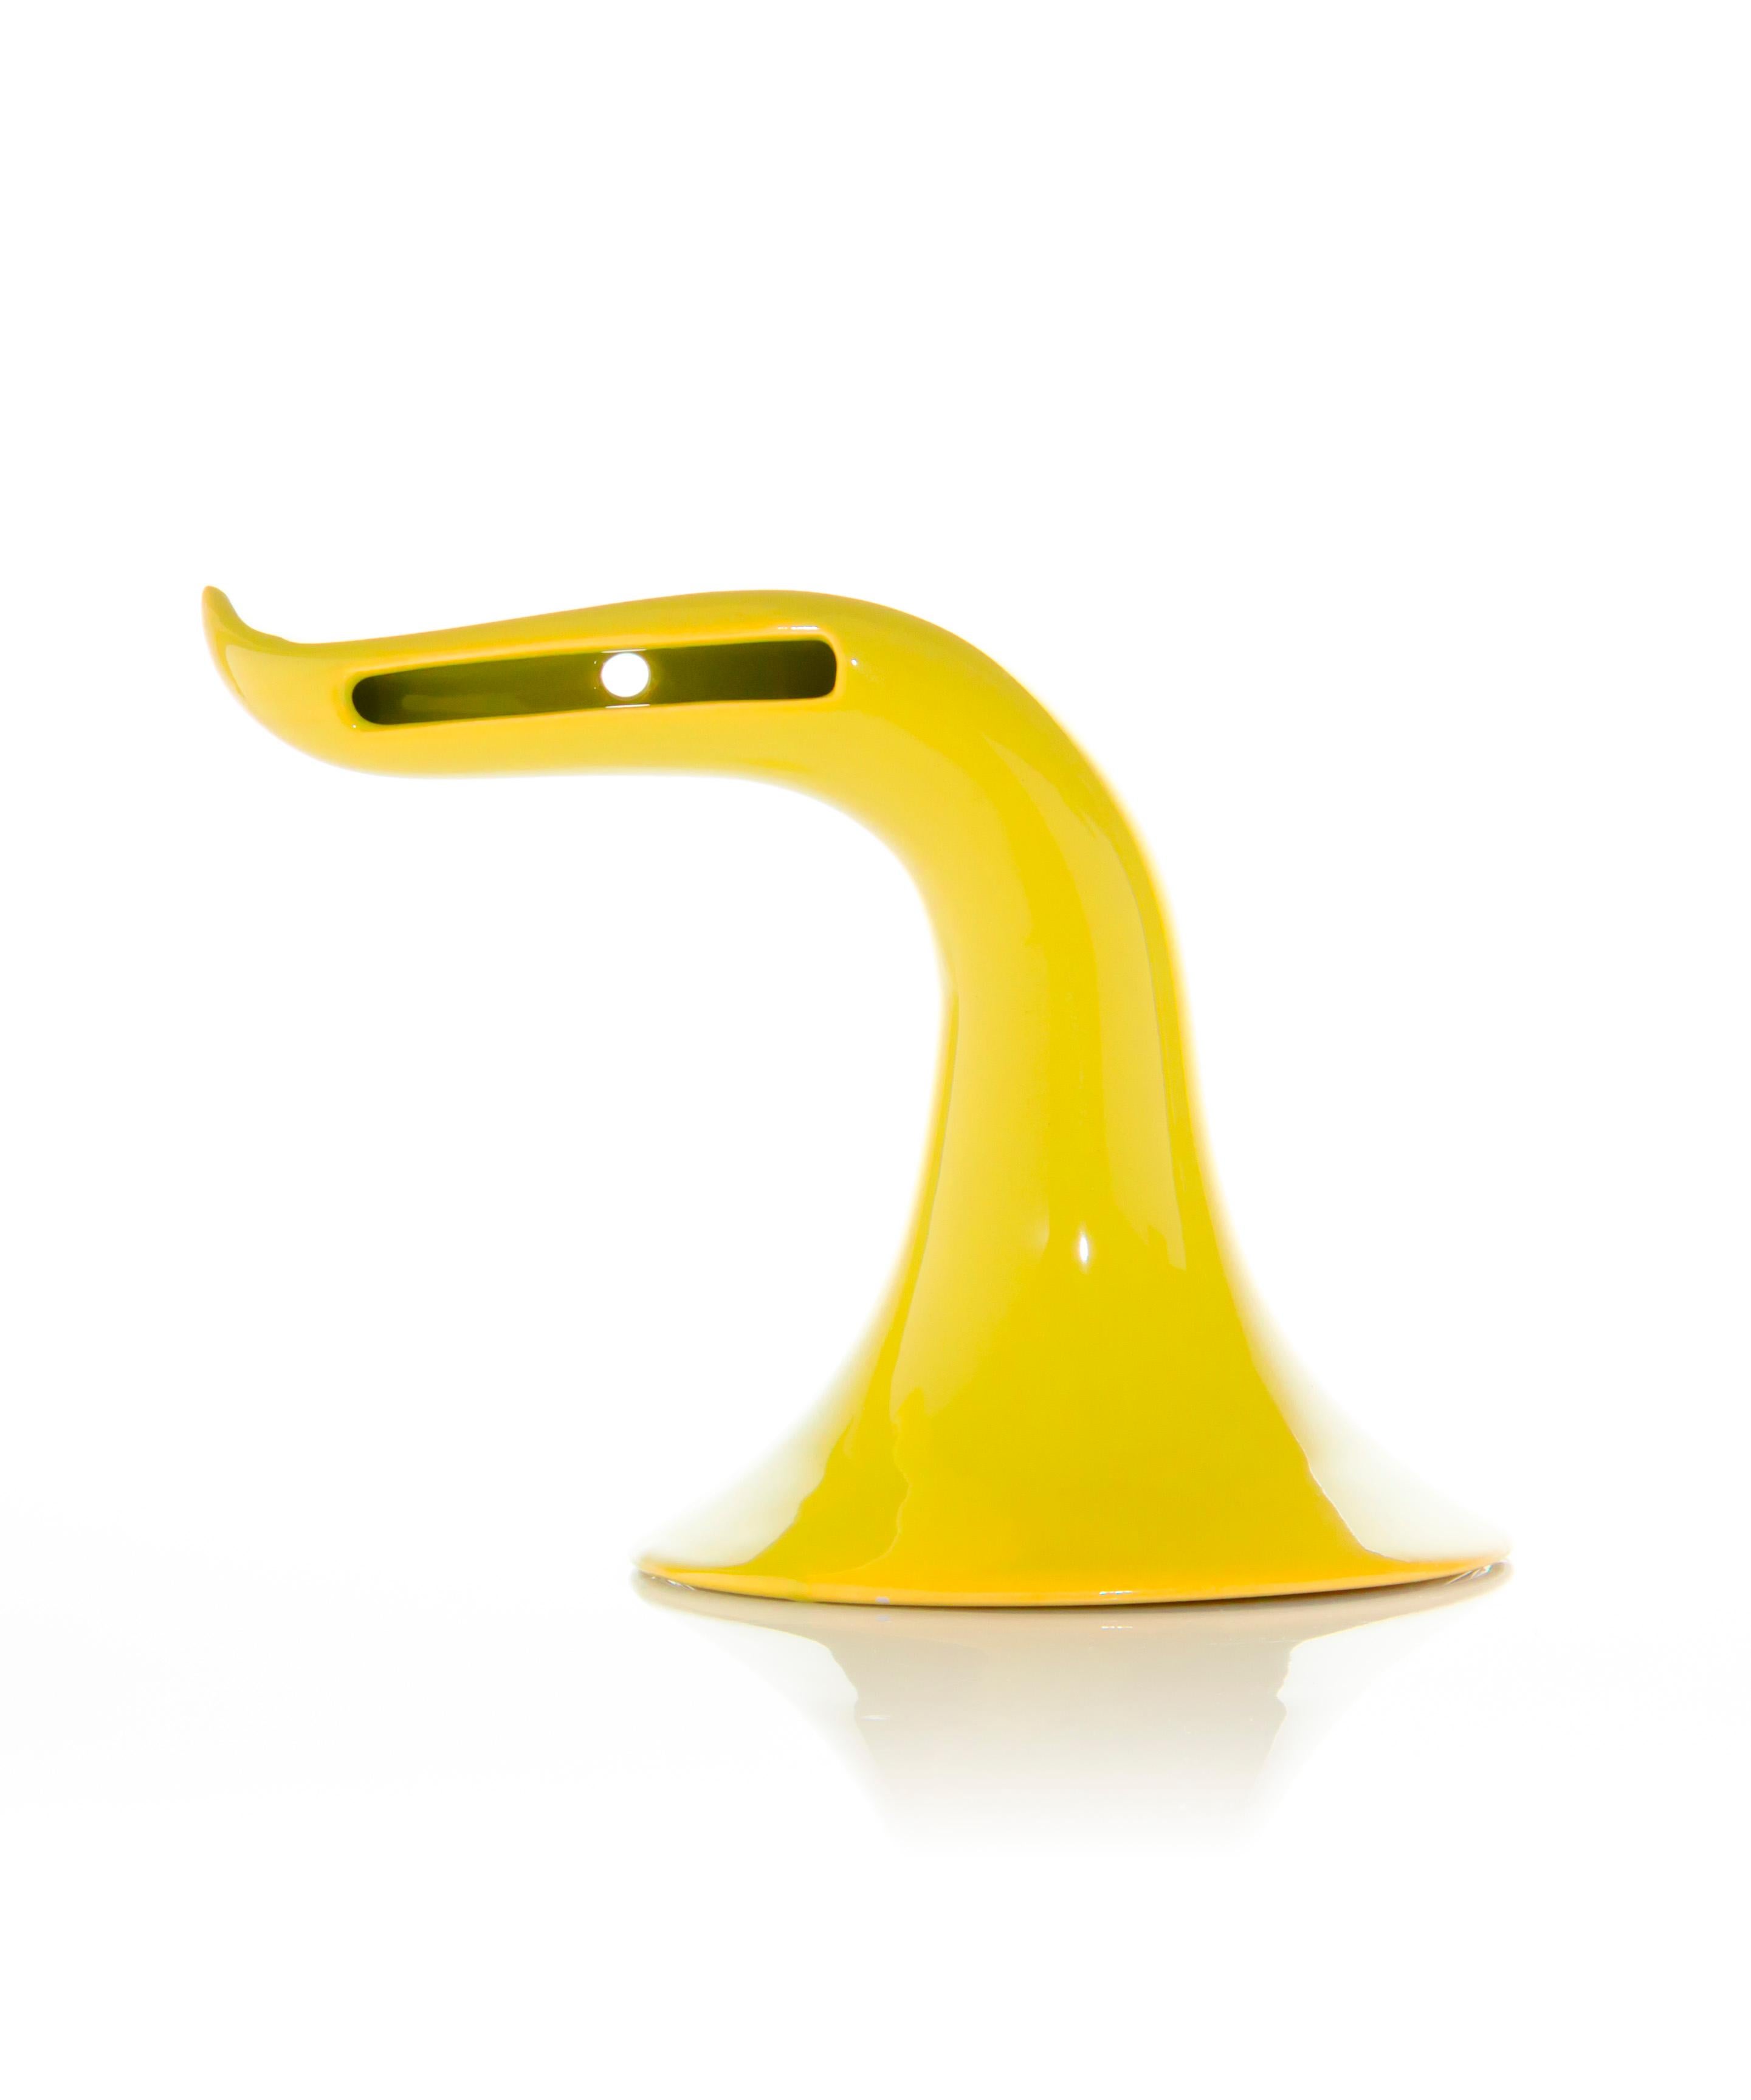 Modern Made in Italy Sound Amplifier, Yellow Ceramics, Customizable Speaker. 2022 For Sale